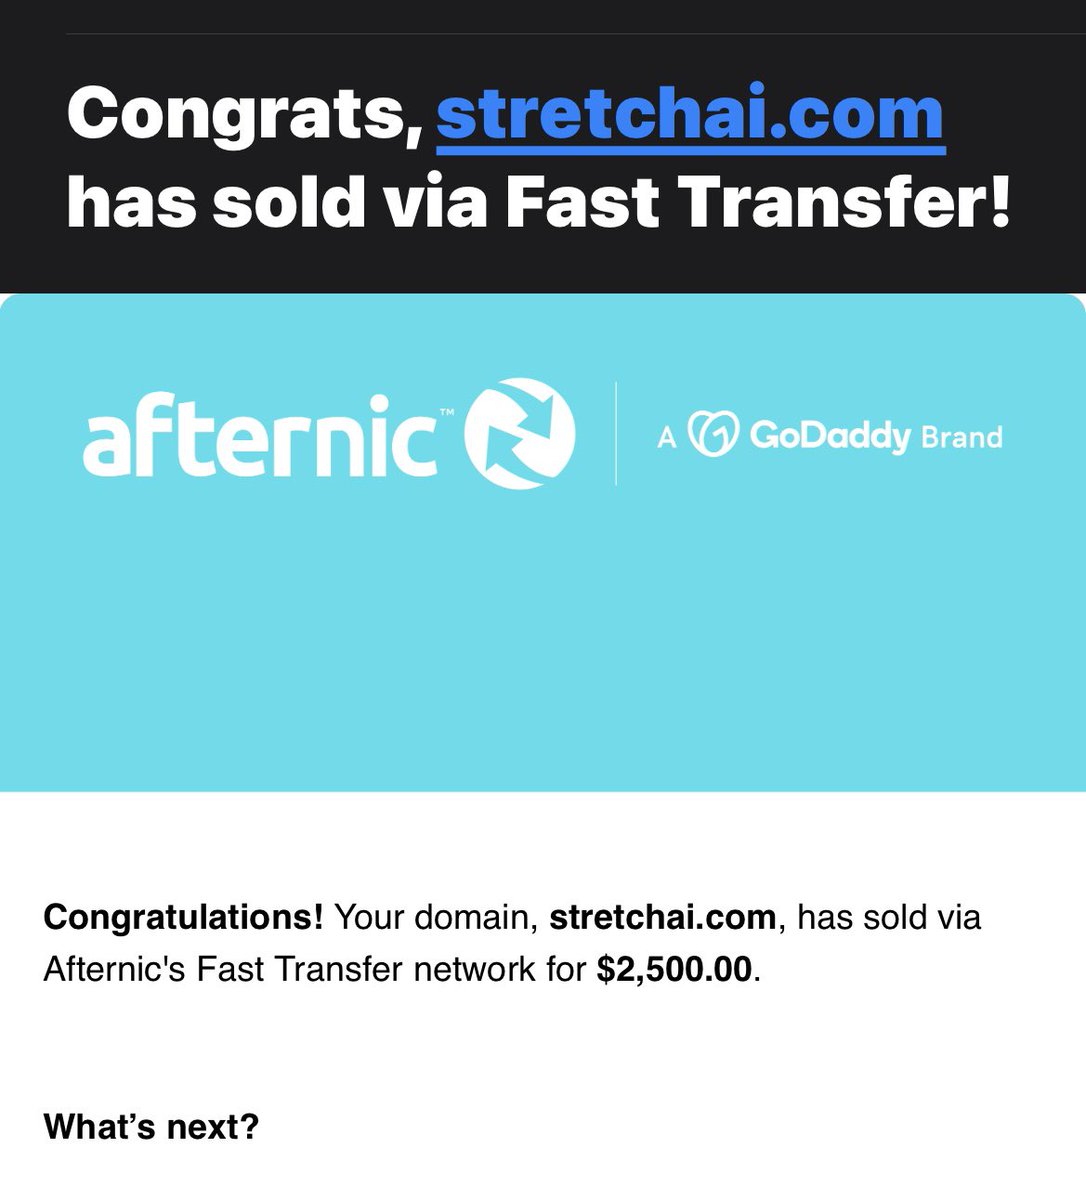 Wrapped up April with a sale from @afternic, negotiated lead through afternic broker. Decided to accept a price lower than my bin to try to salvage a bit of a crappy month. Hoping May will be much better. Cheers! #afternic #godaddy #domain #domains #domainnames #domaining